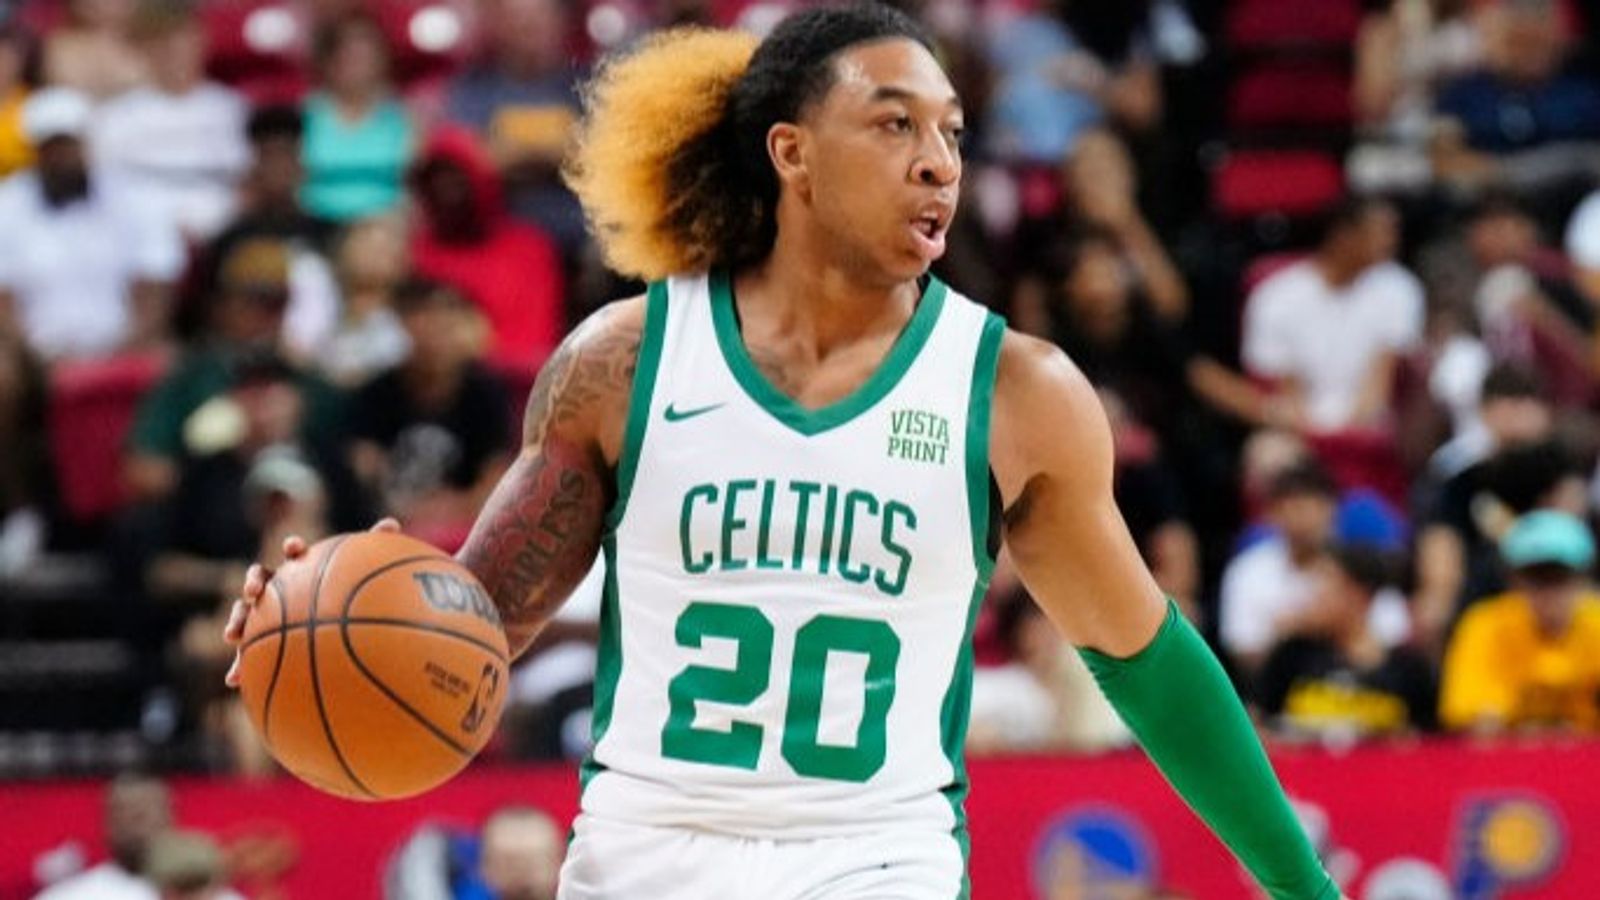 The best basketball players from Boston Celtics - Think Big